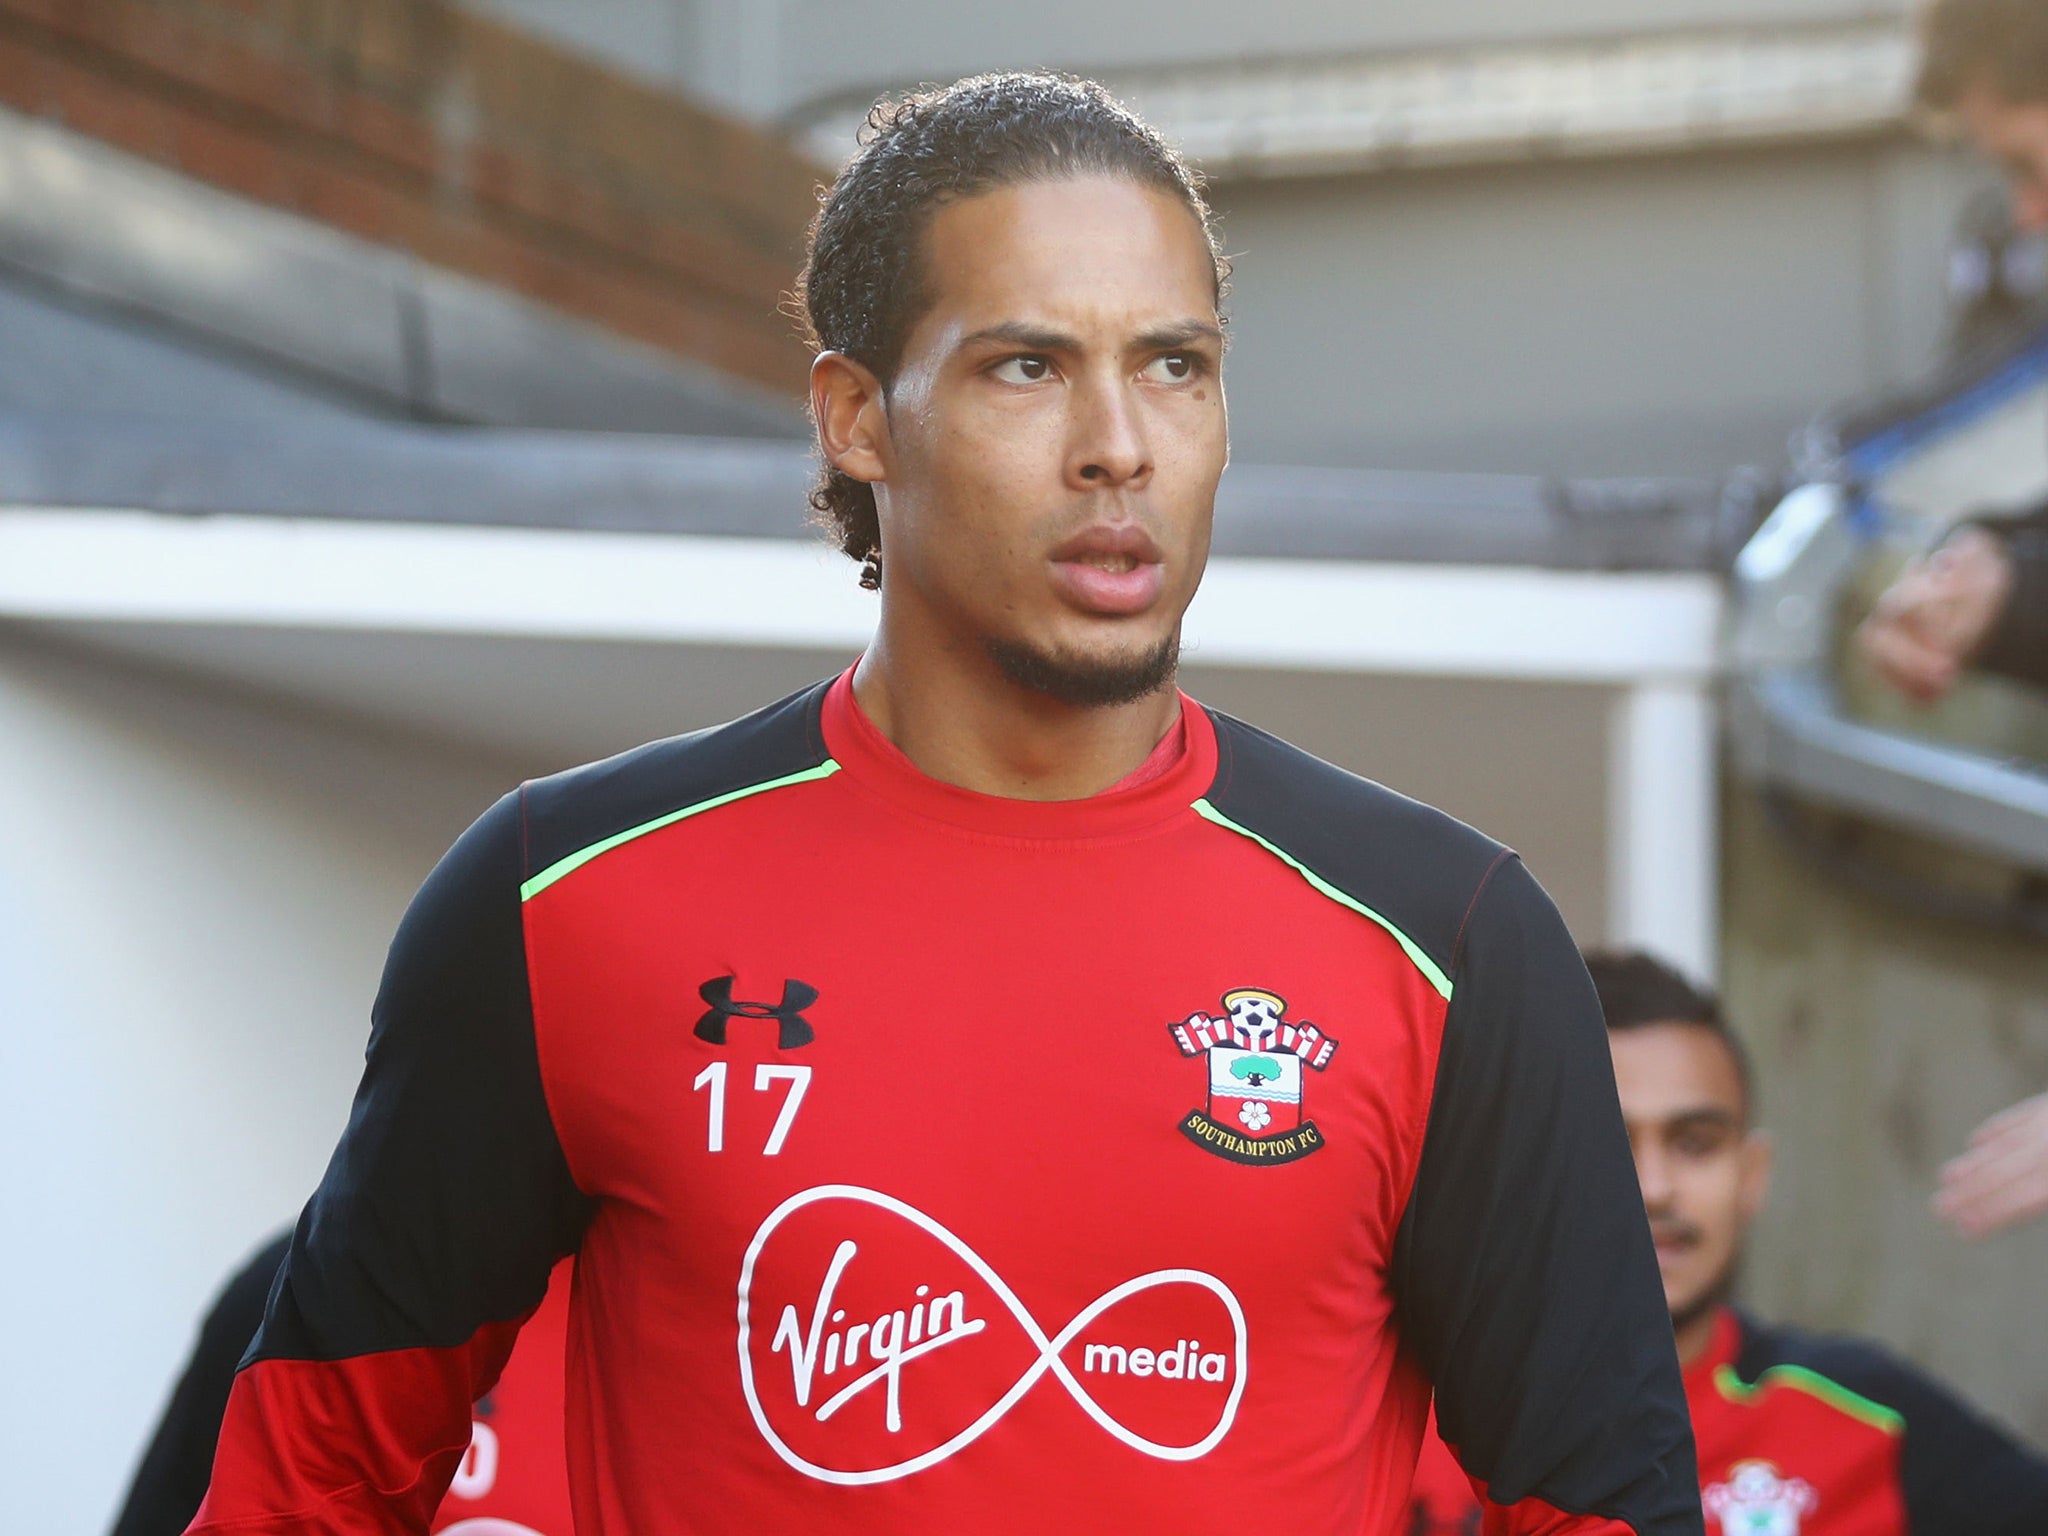 Van Dijk has been linked with a move to Anfield in recent months